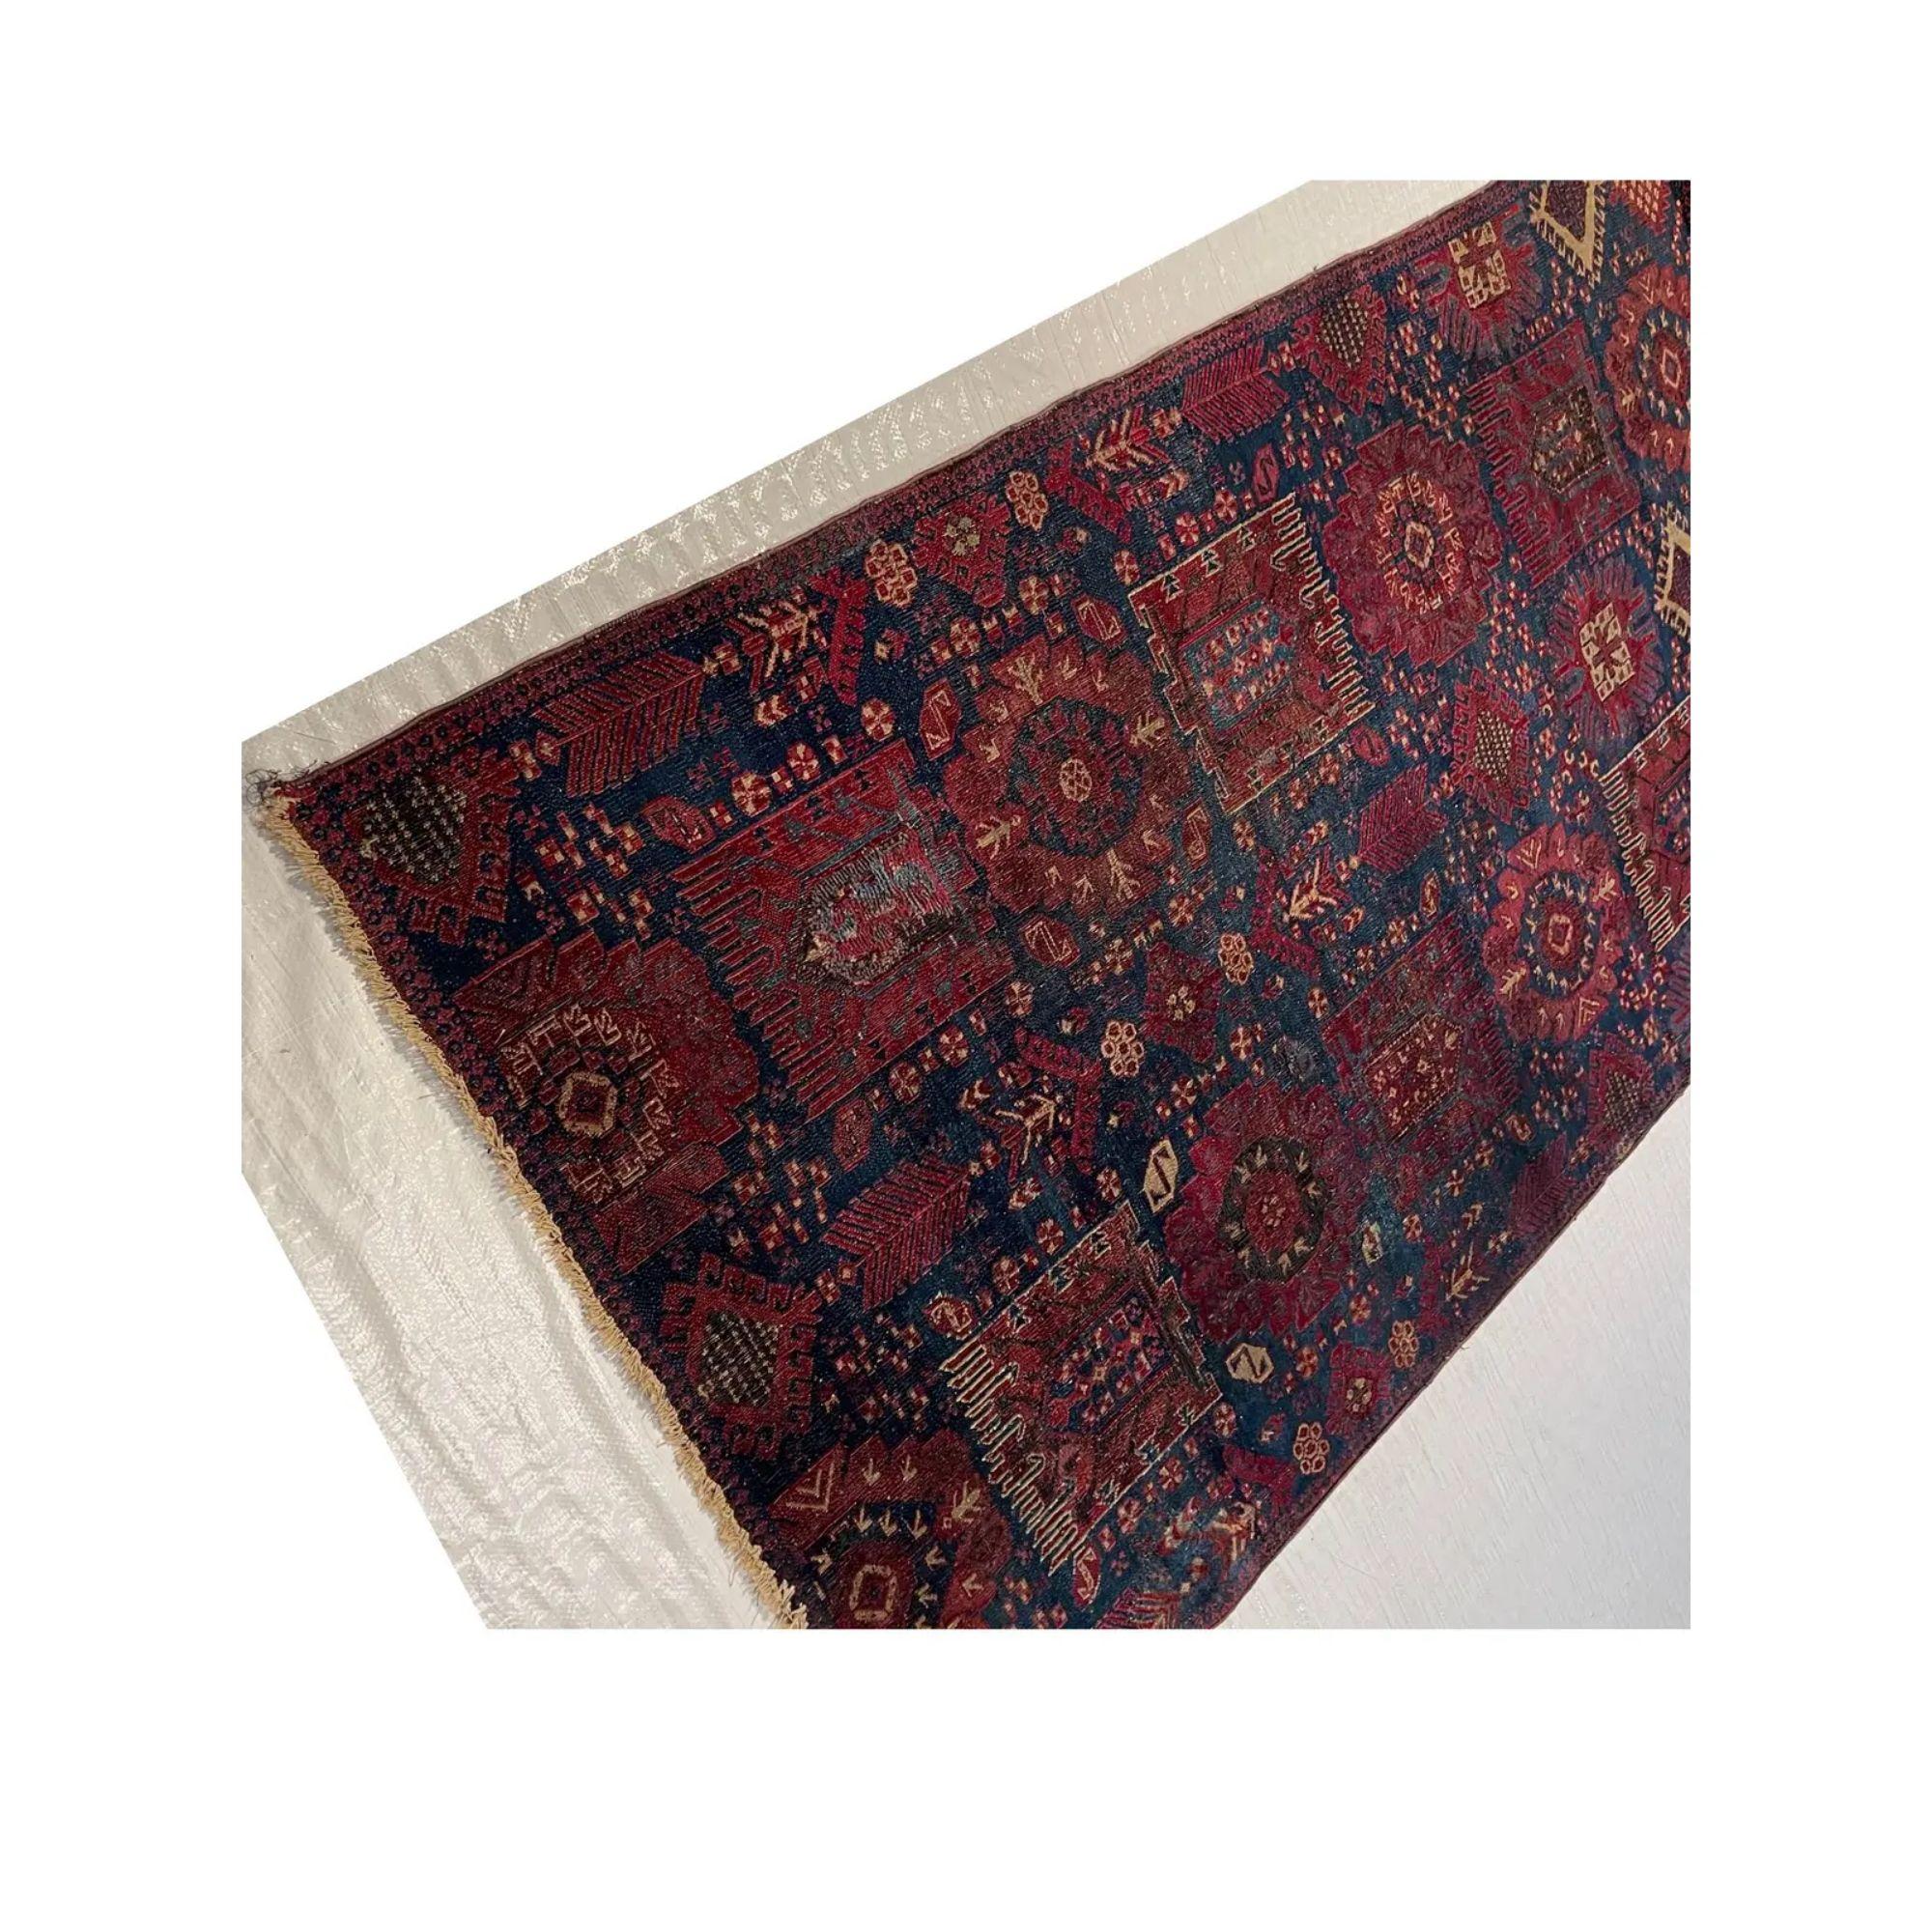 Early 20th Century Antique Spanish Geometric Rug 4'x4' For Sale